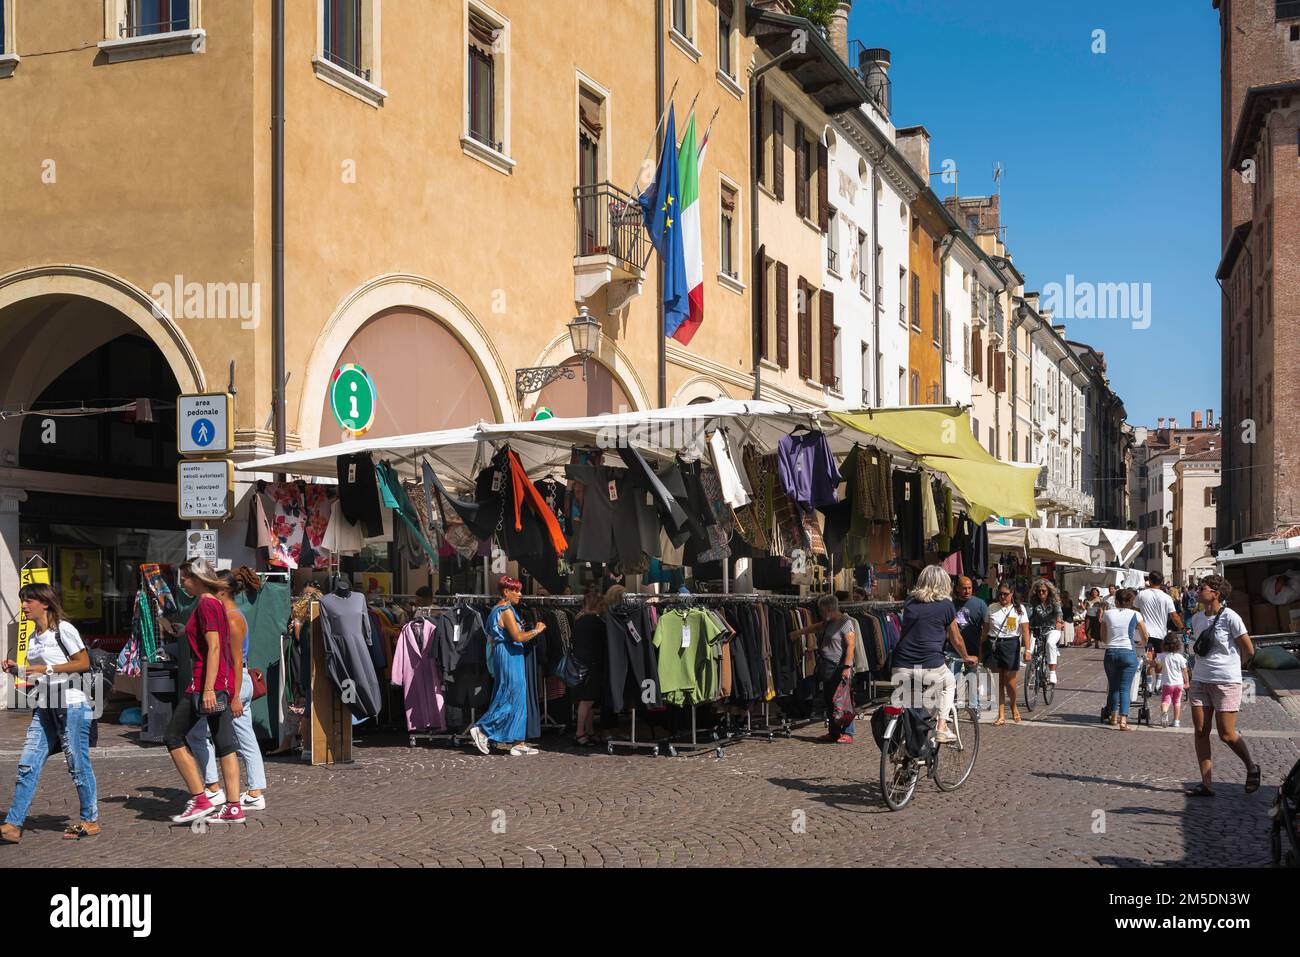 Market Italy, view in summer of the busy morning market sited in the Piazza delle Erbe in the scenic Renaissance era city of Mantua (Mantova), Italy Stock Photo